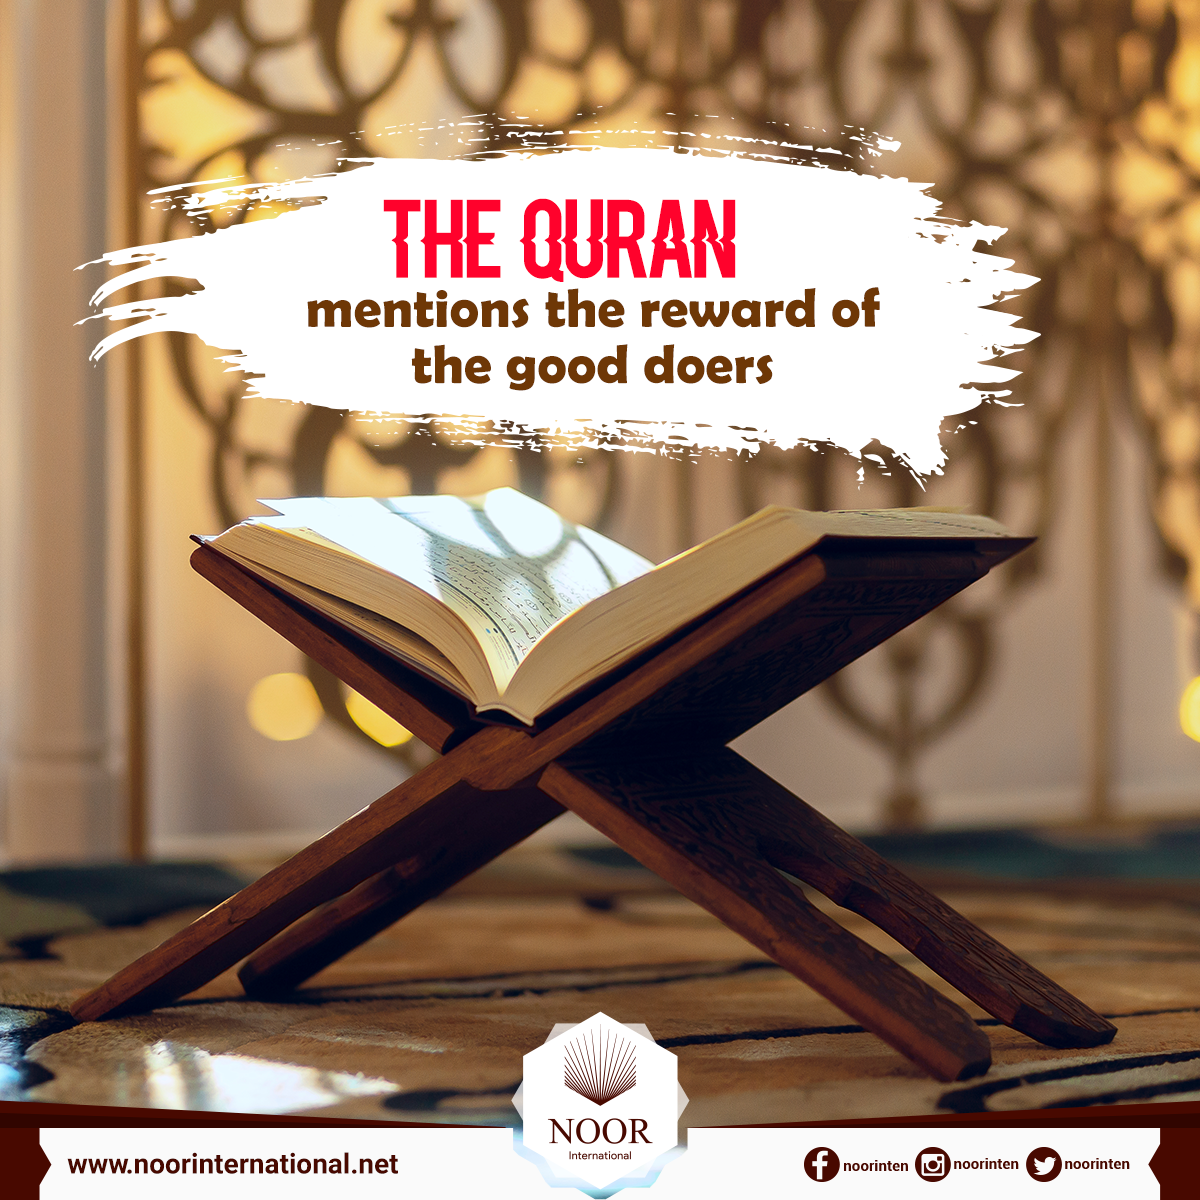 The Quran mentions the reward of the good doers